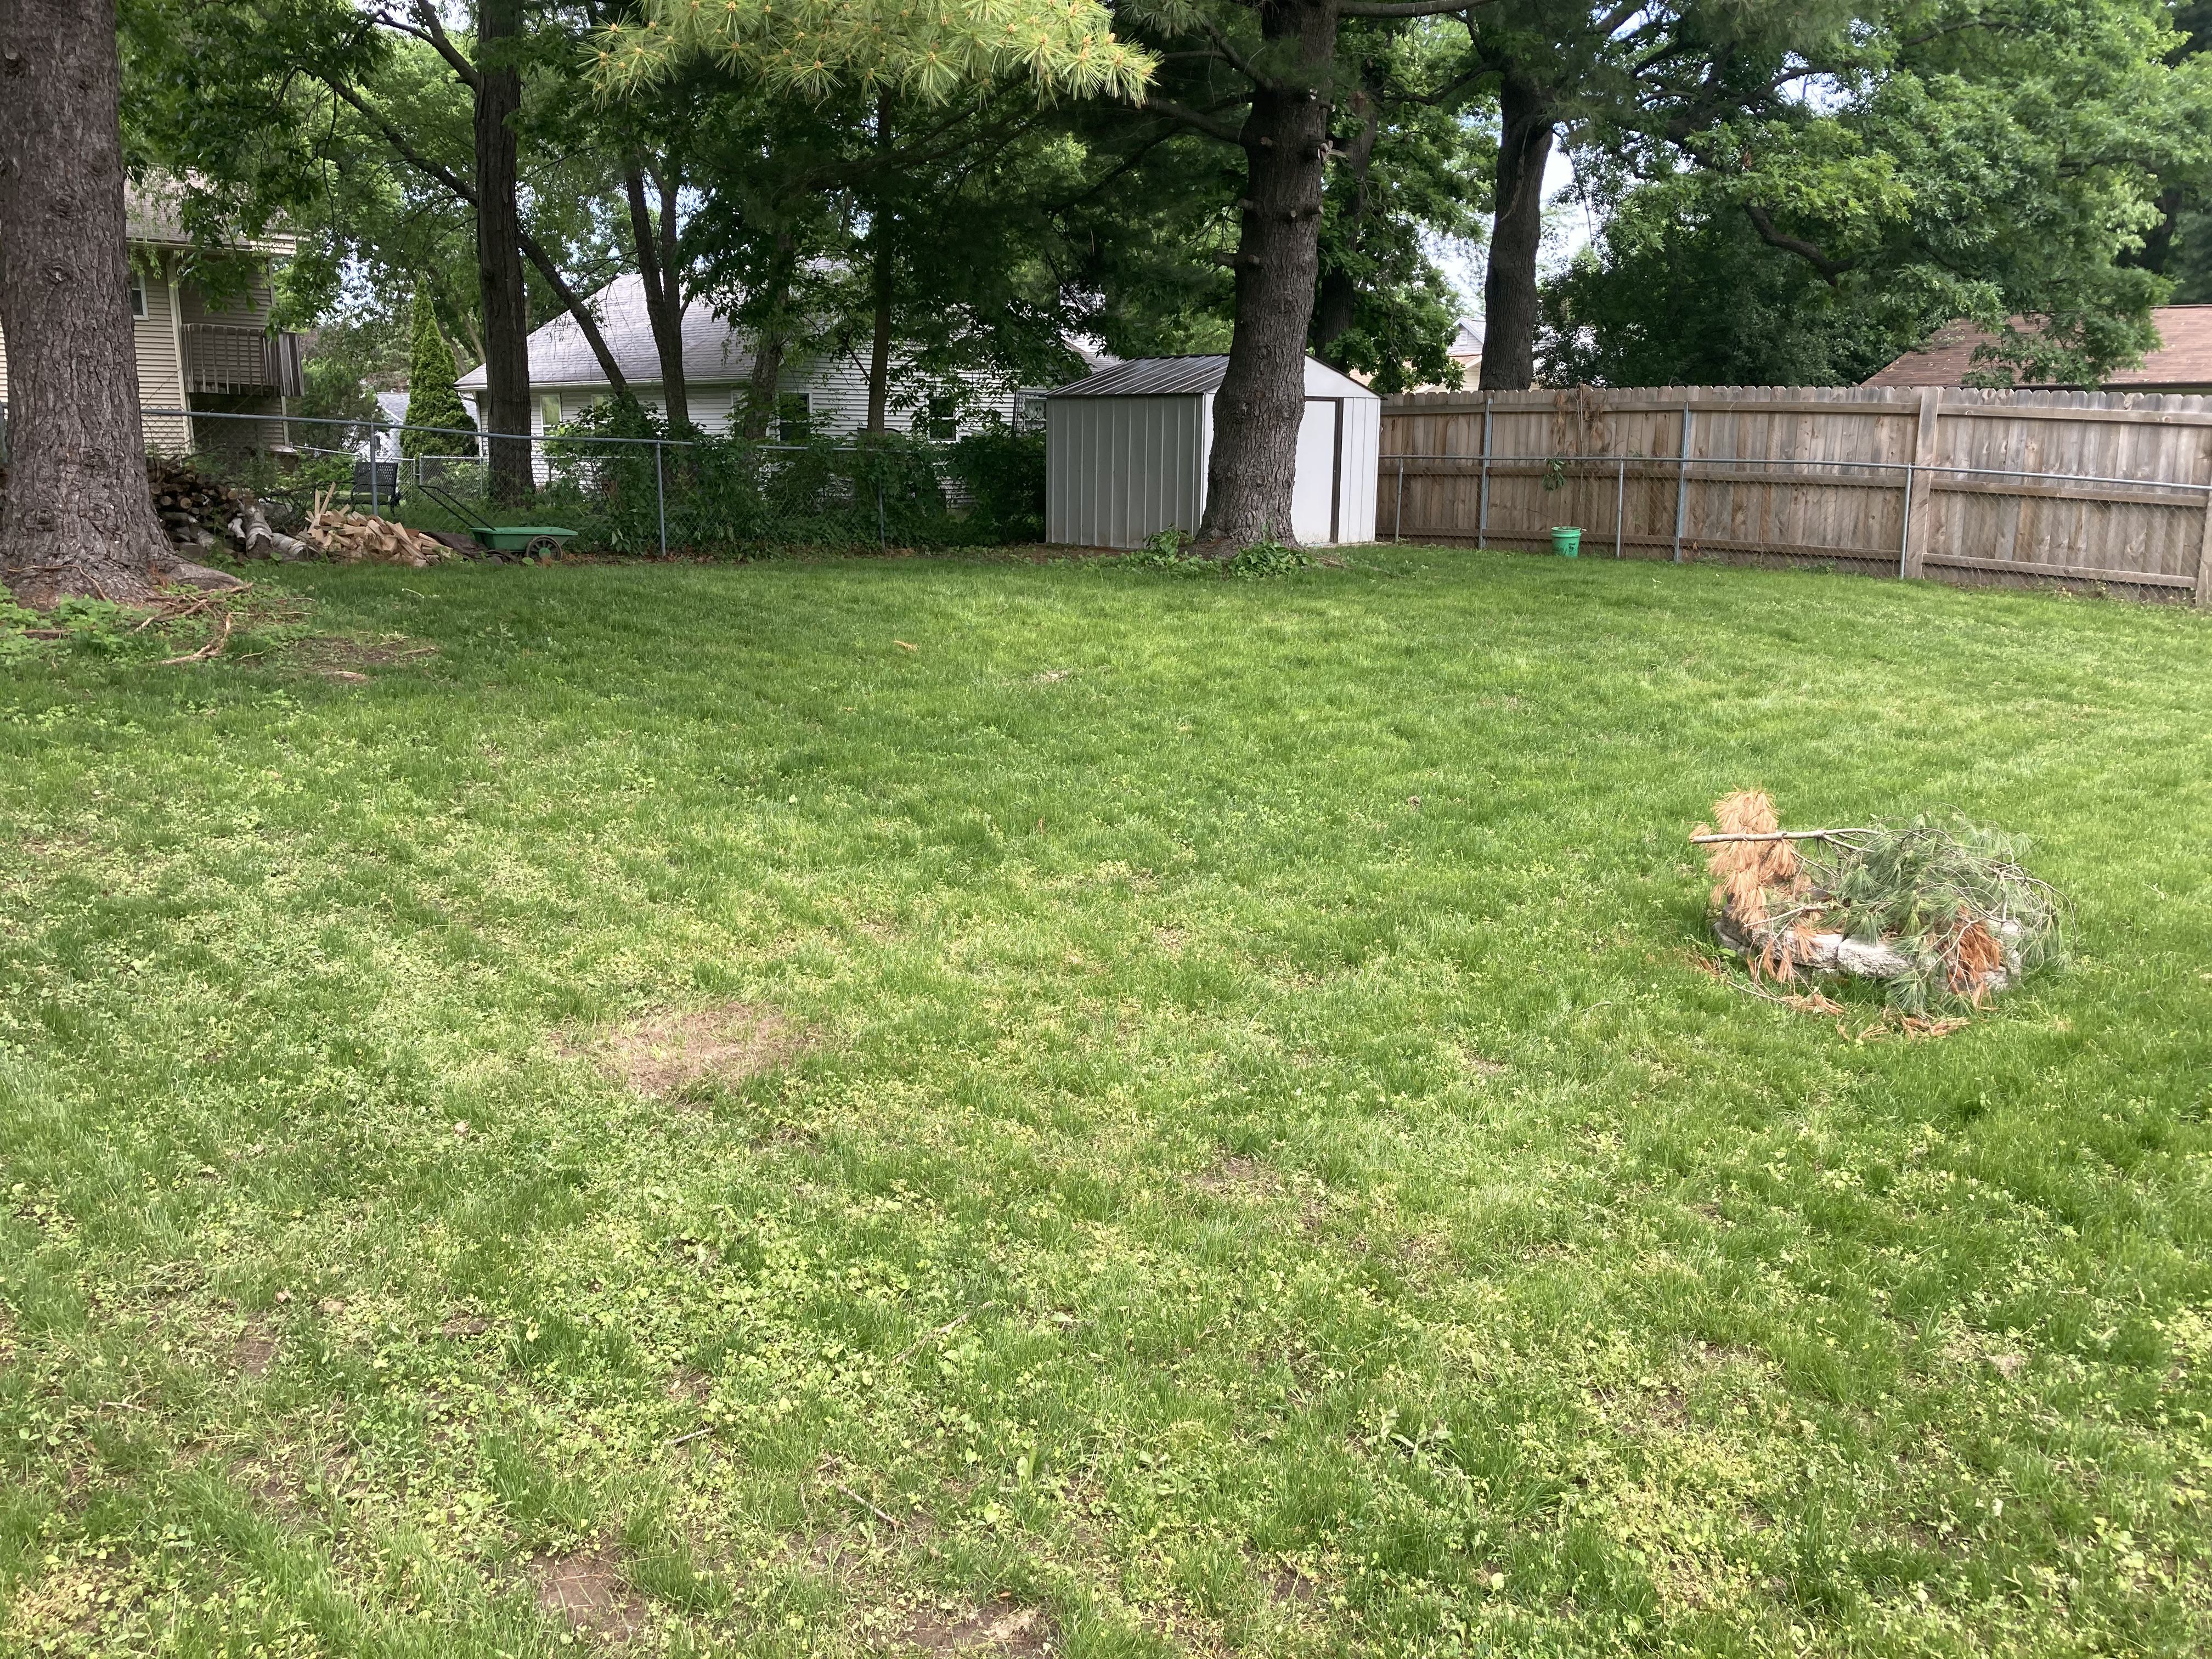 The grass is established and mowed